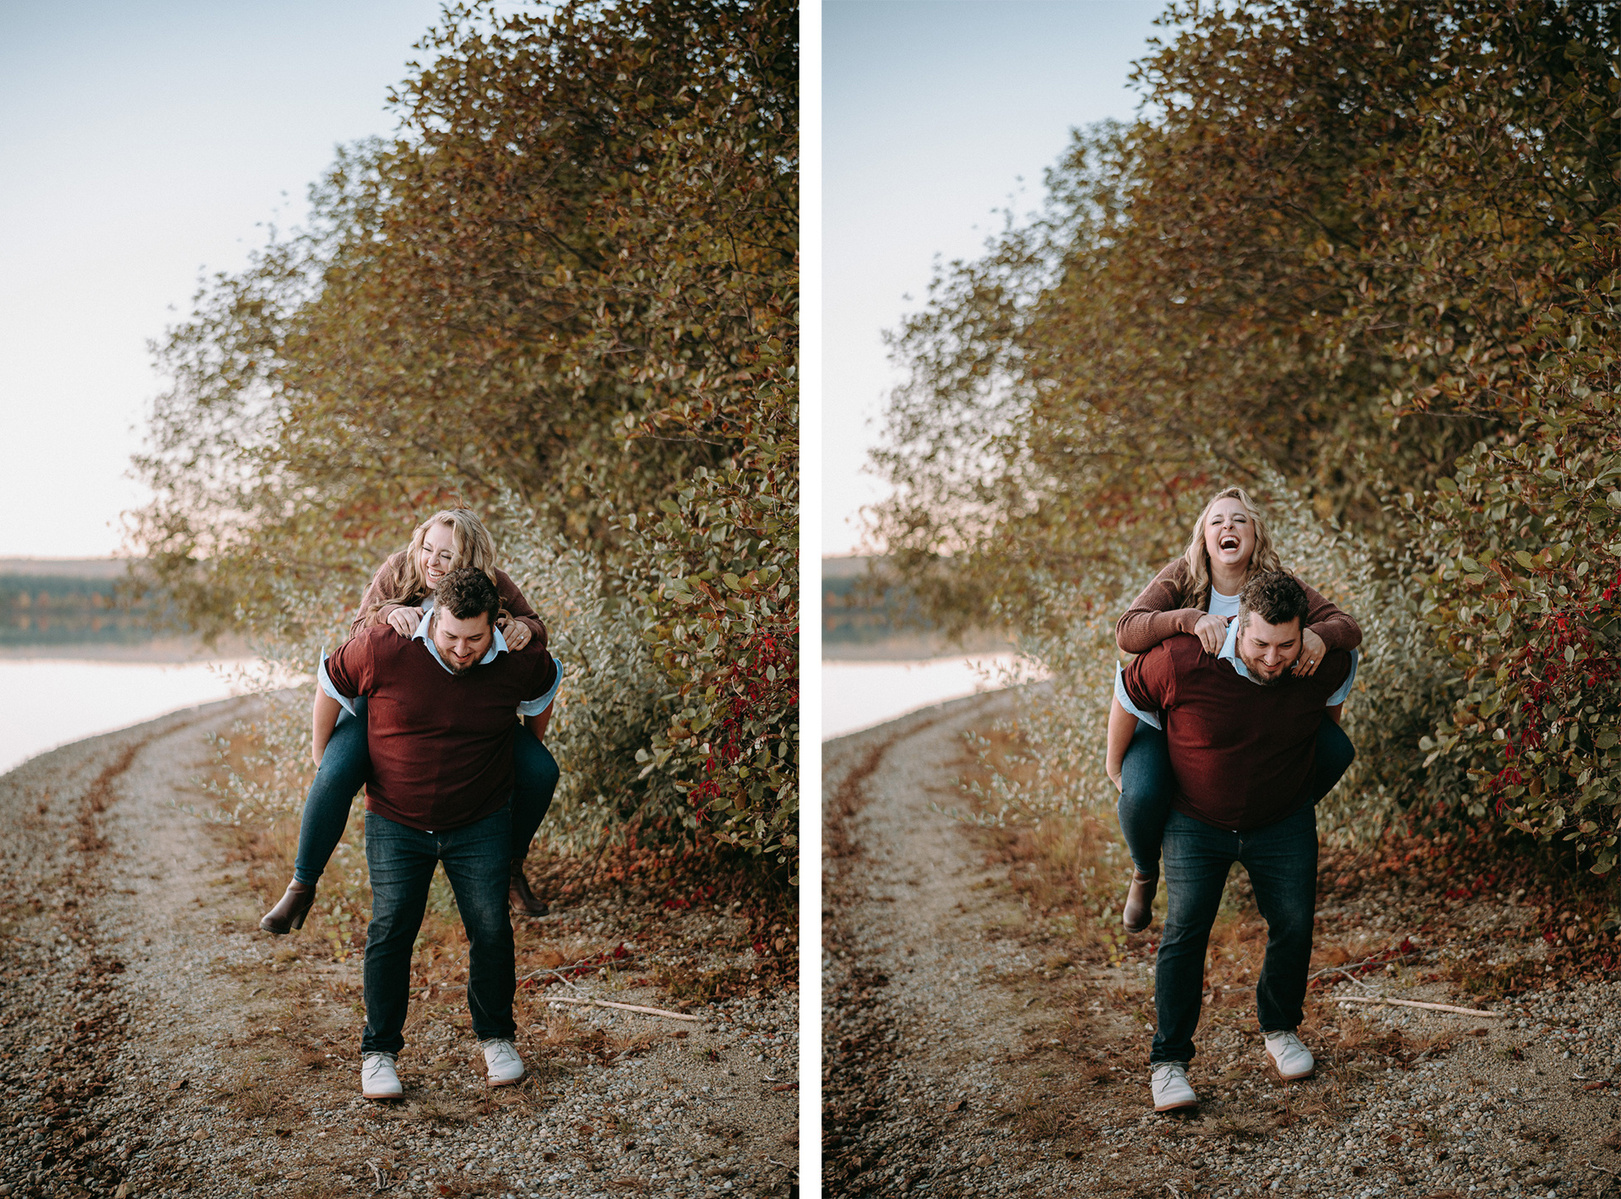 Piggyback ride on beach during engagement session at Old Stone Church, West Boylston, Massachusetts.